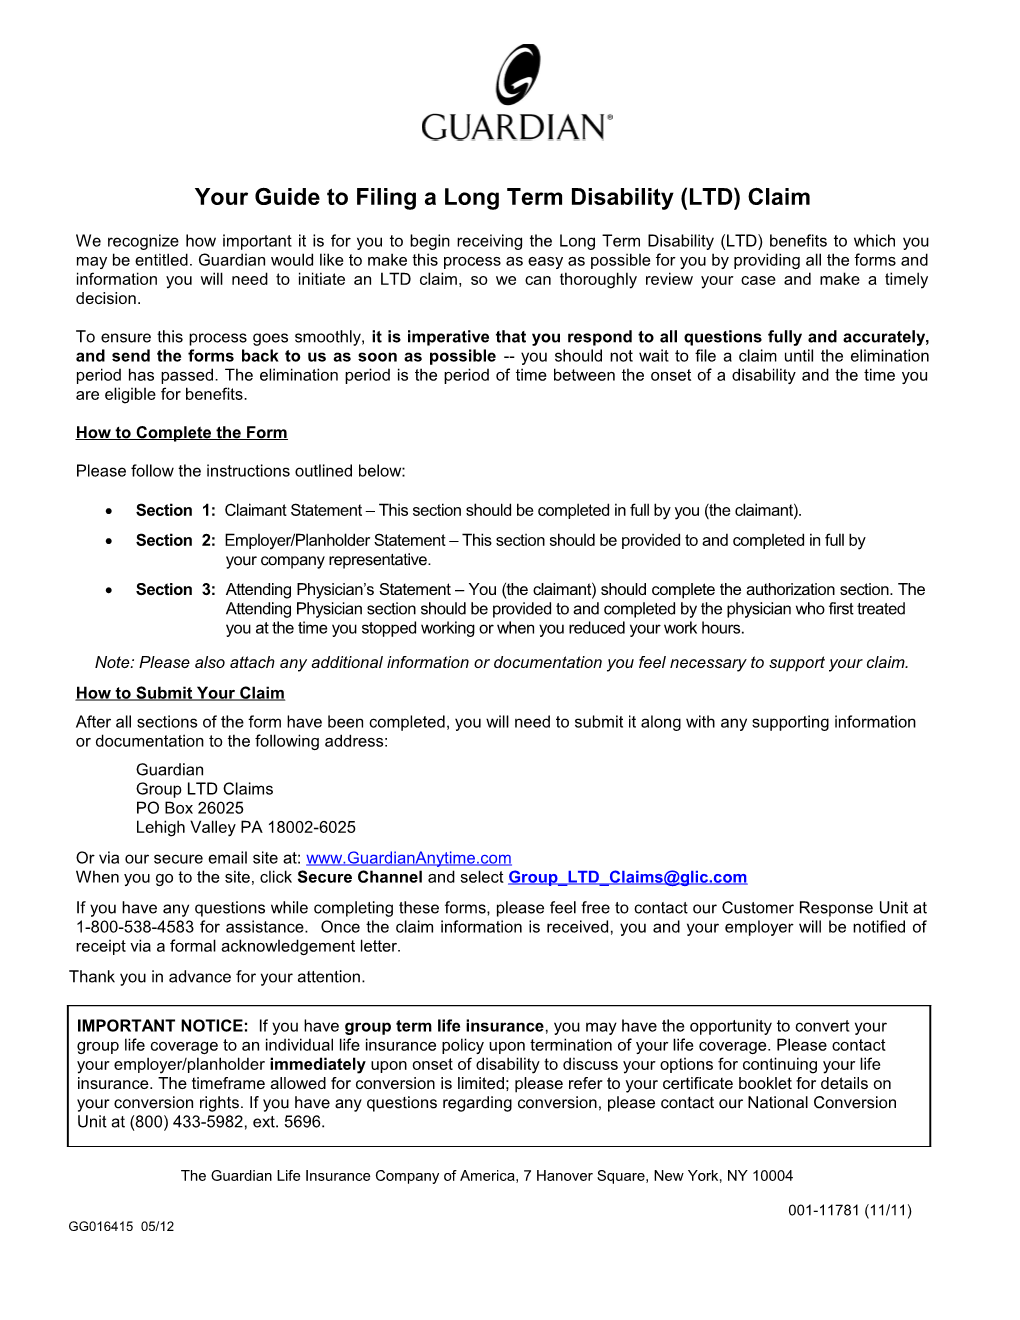 Your Guide to Filing a Long Term Disability (LTD) Claim